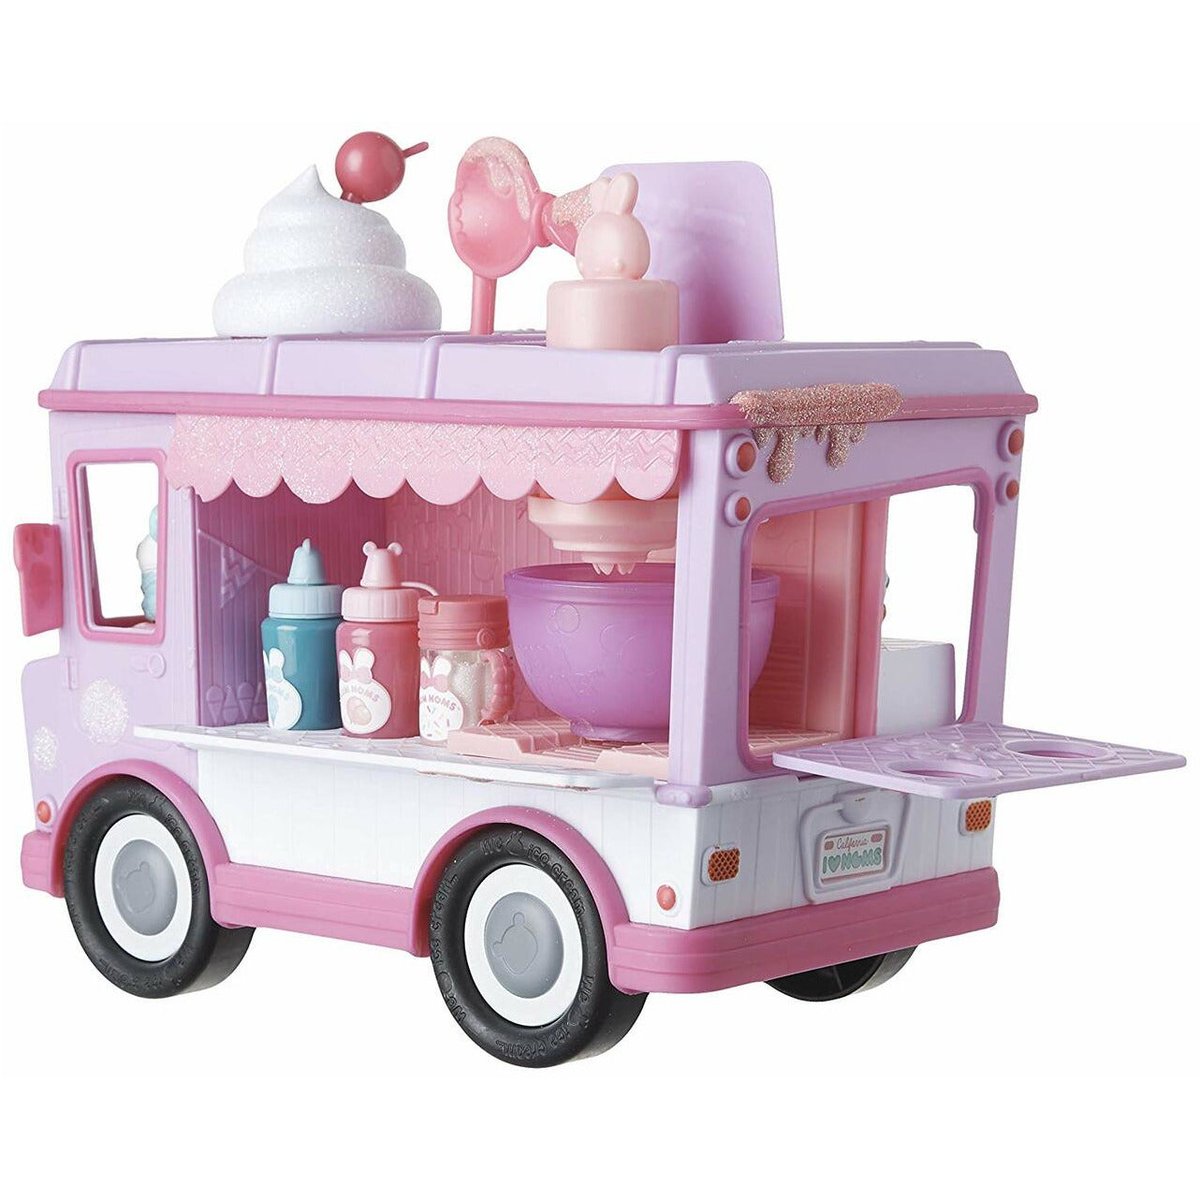 Num Noms Ice Cream Parlor Toy Playset With 7 Accessories